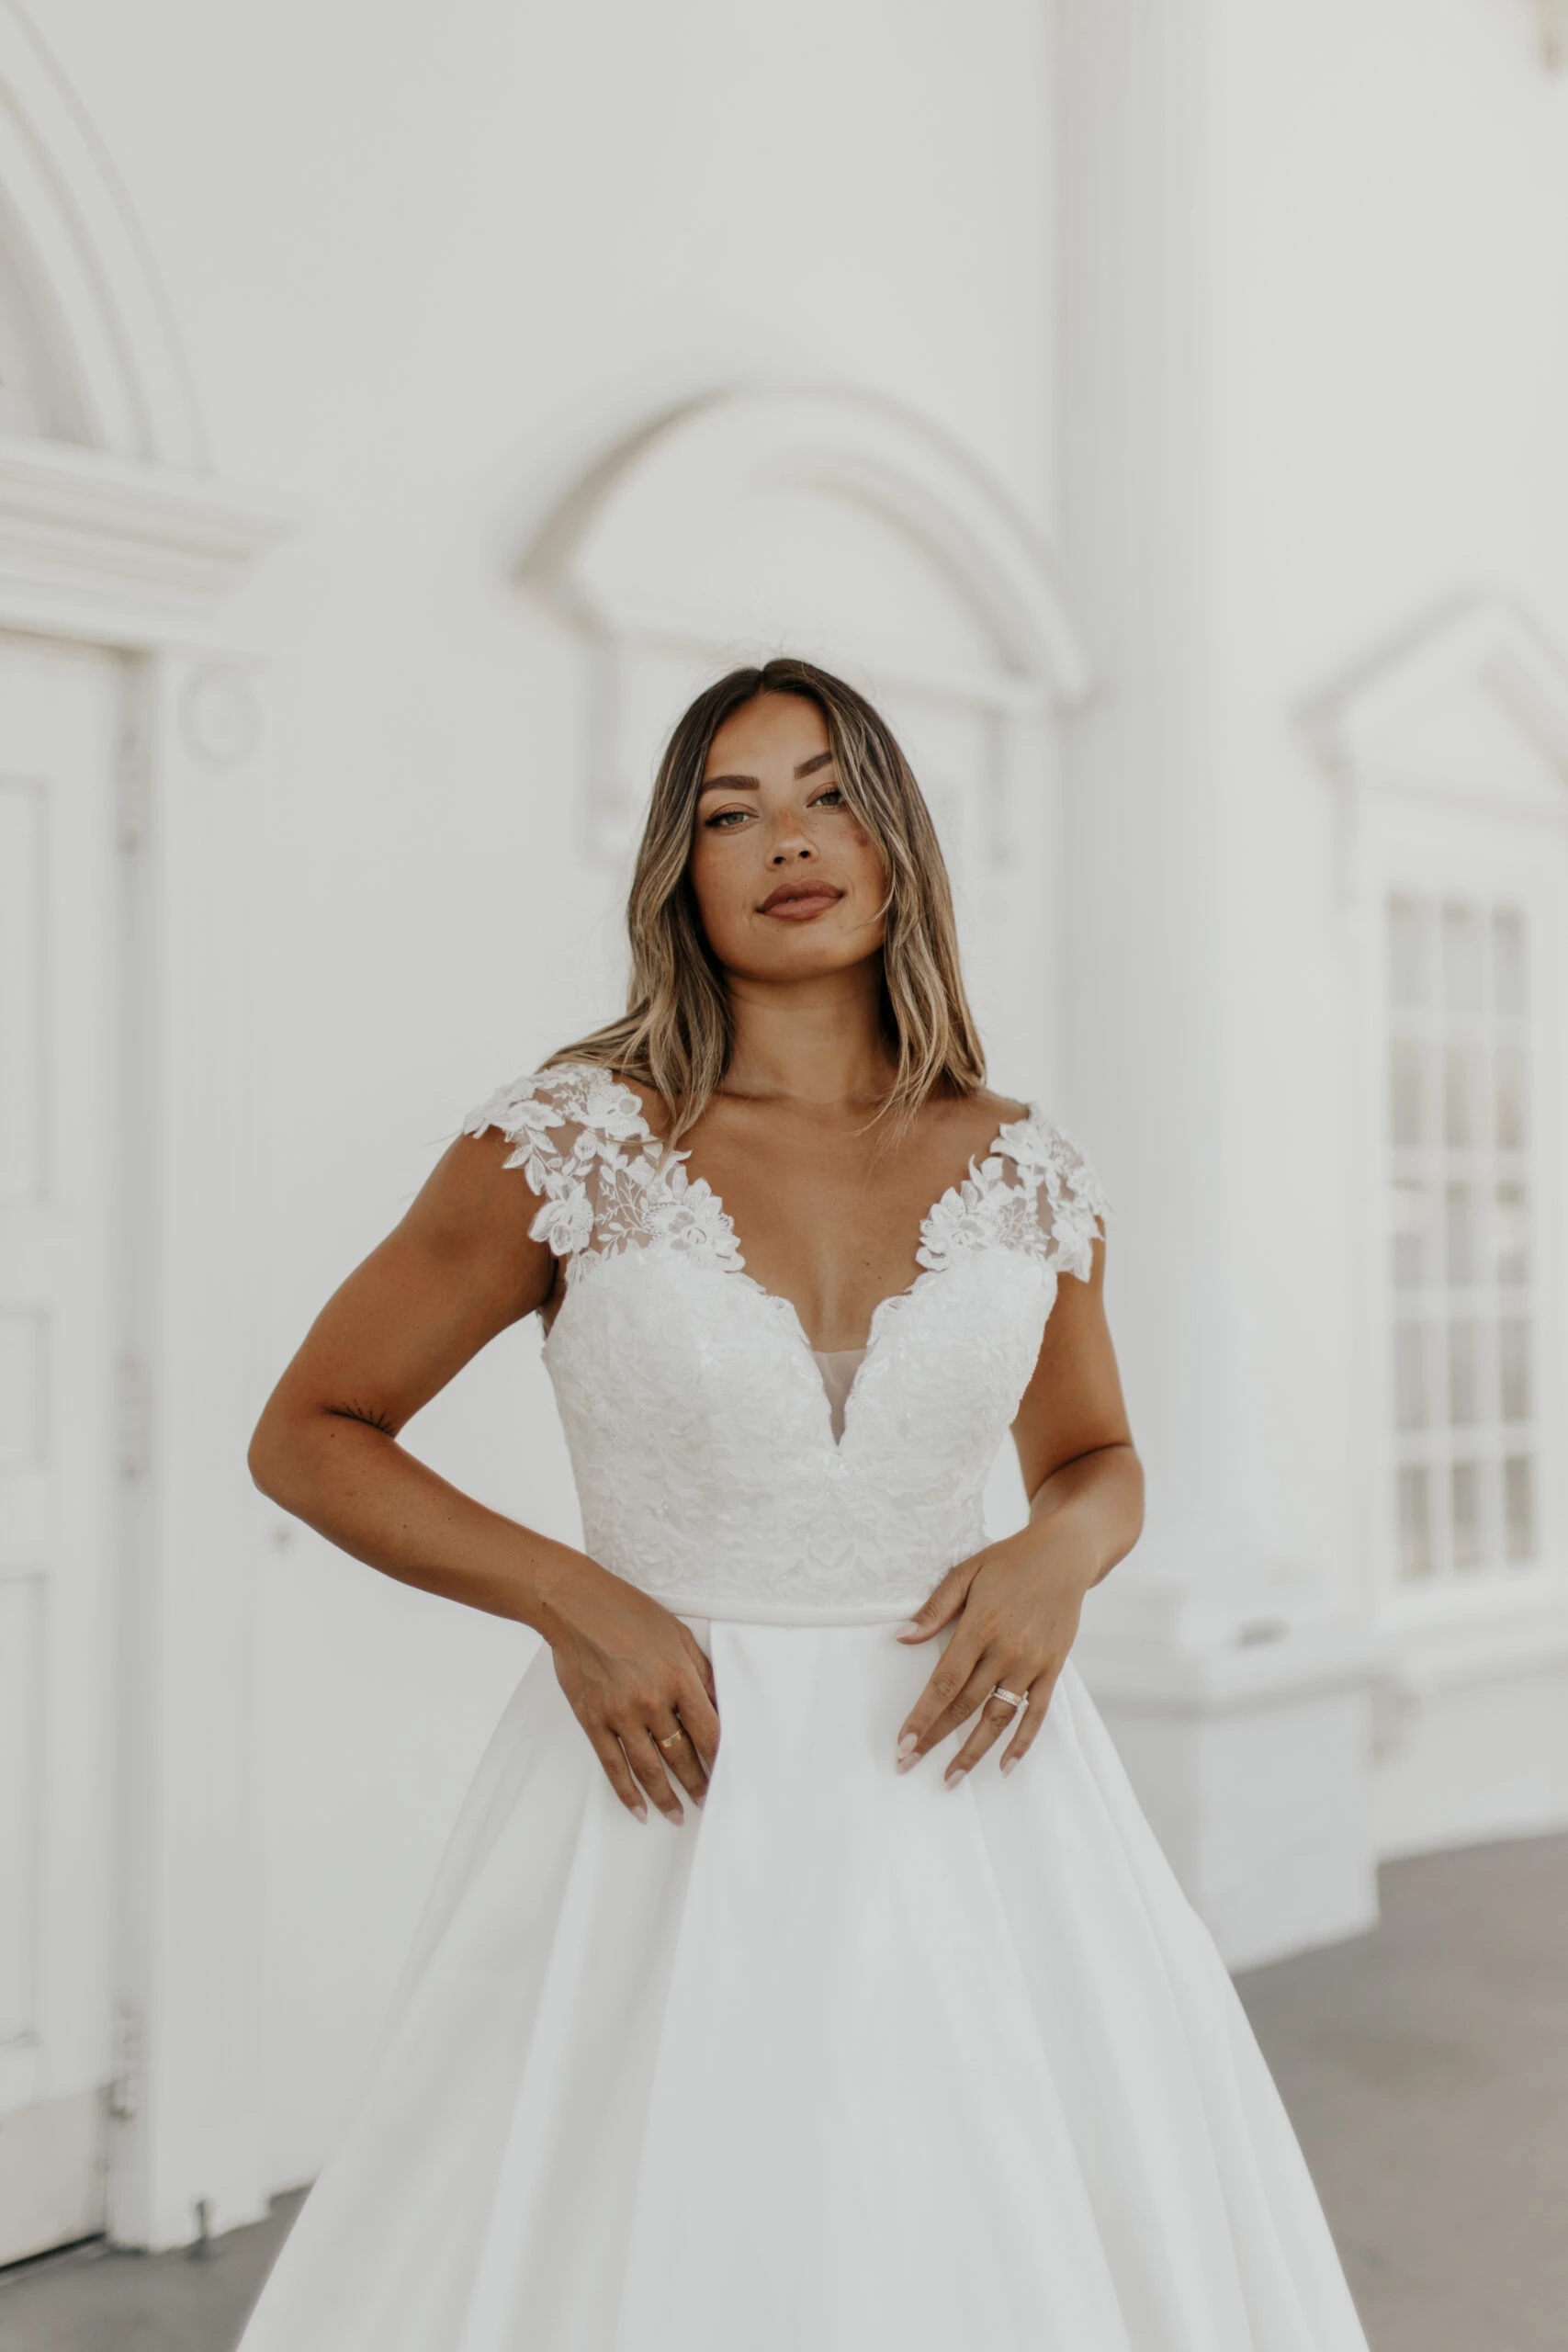 Lace Wedding Dress with Pockets and Sleeves - 7577 by Stella York 